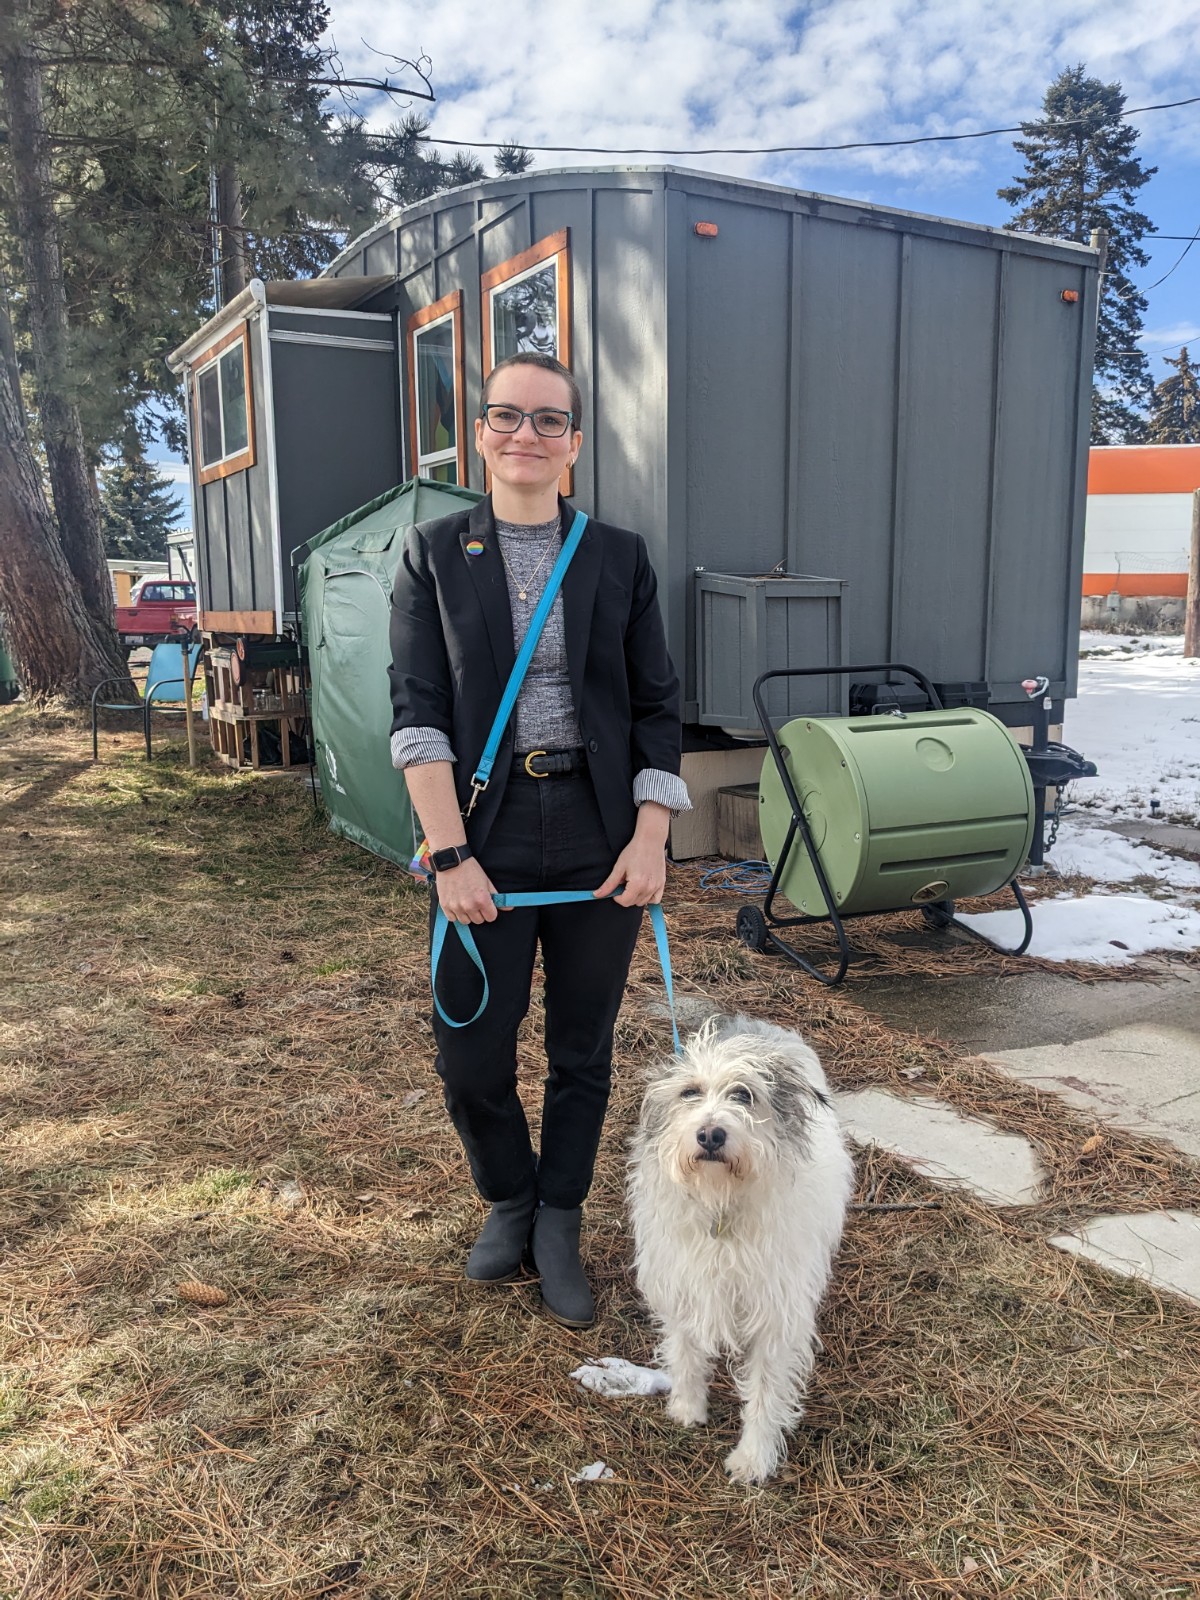 A person with black pants and a black jacket stands in front of a grey tiny home next to a white dog with a blue leash.